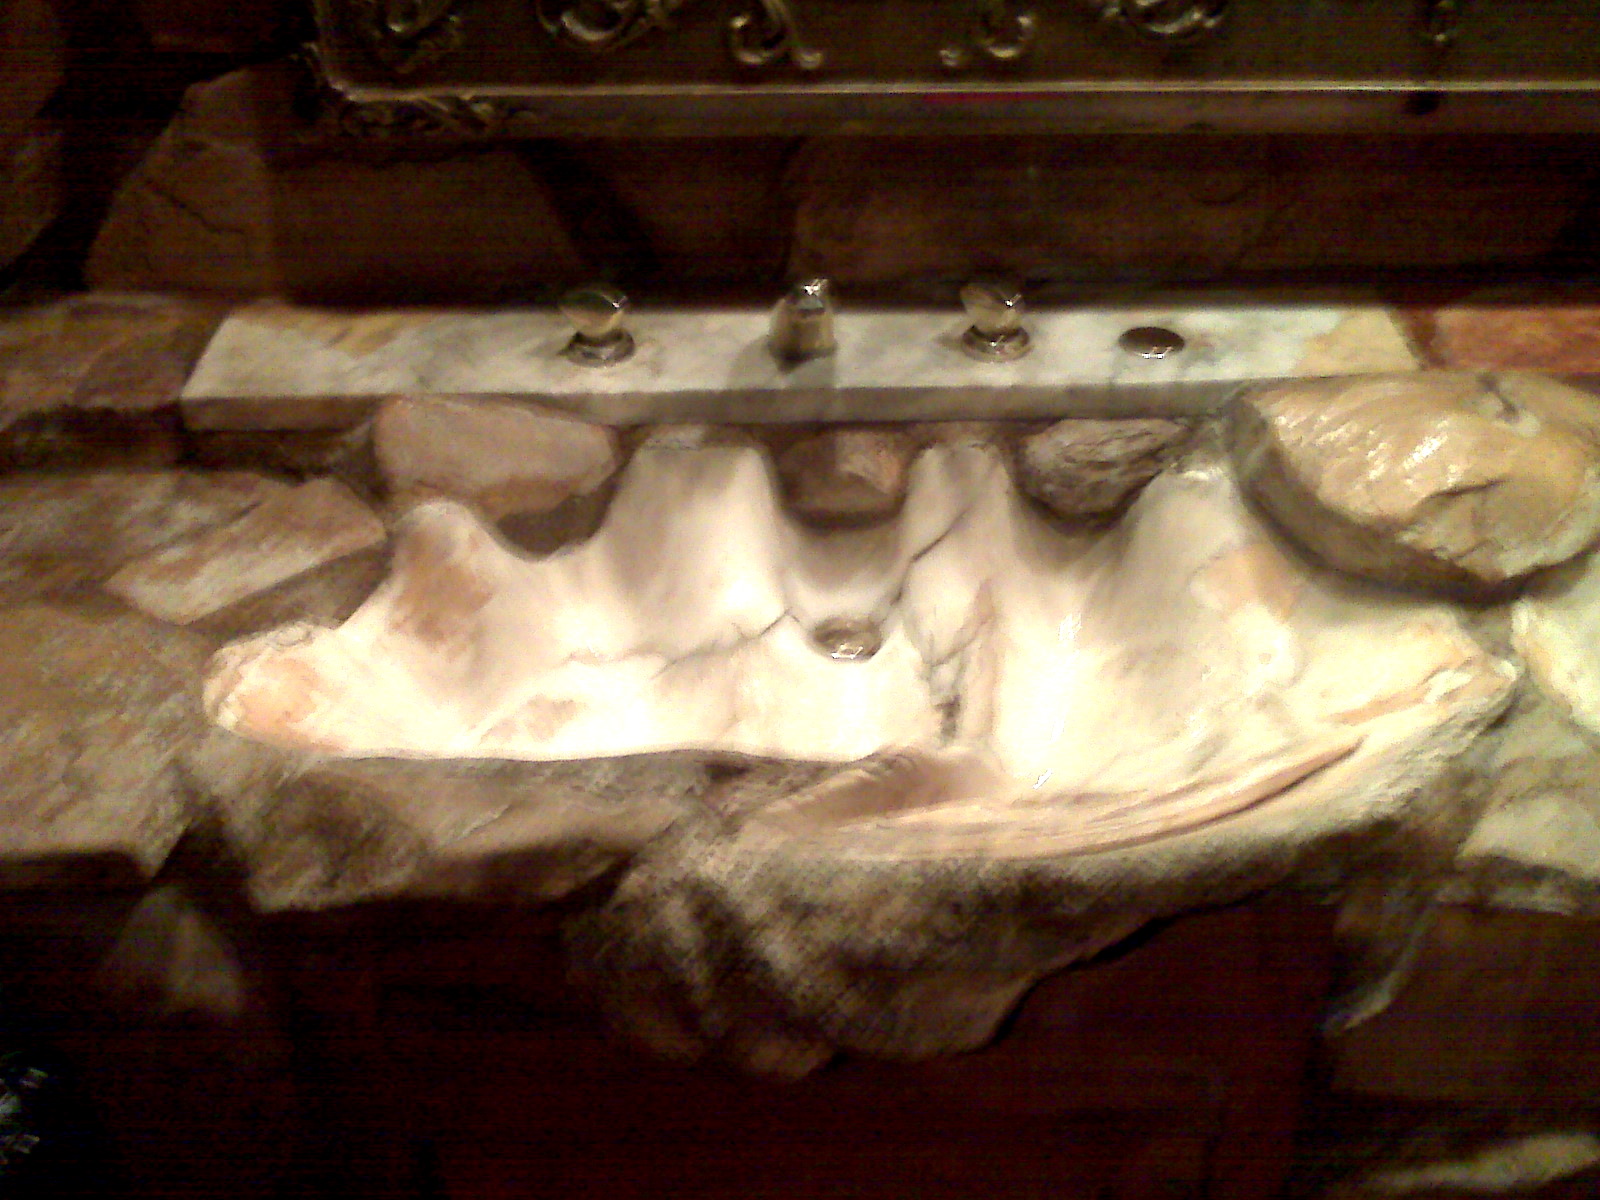 clam shell sink